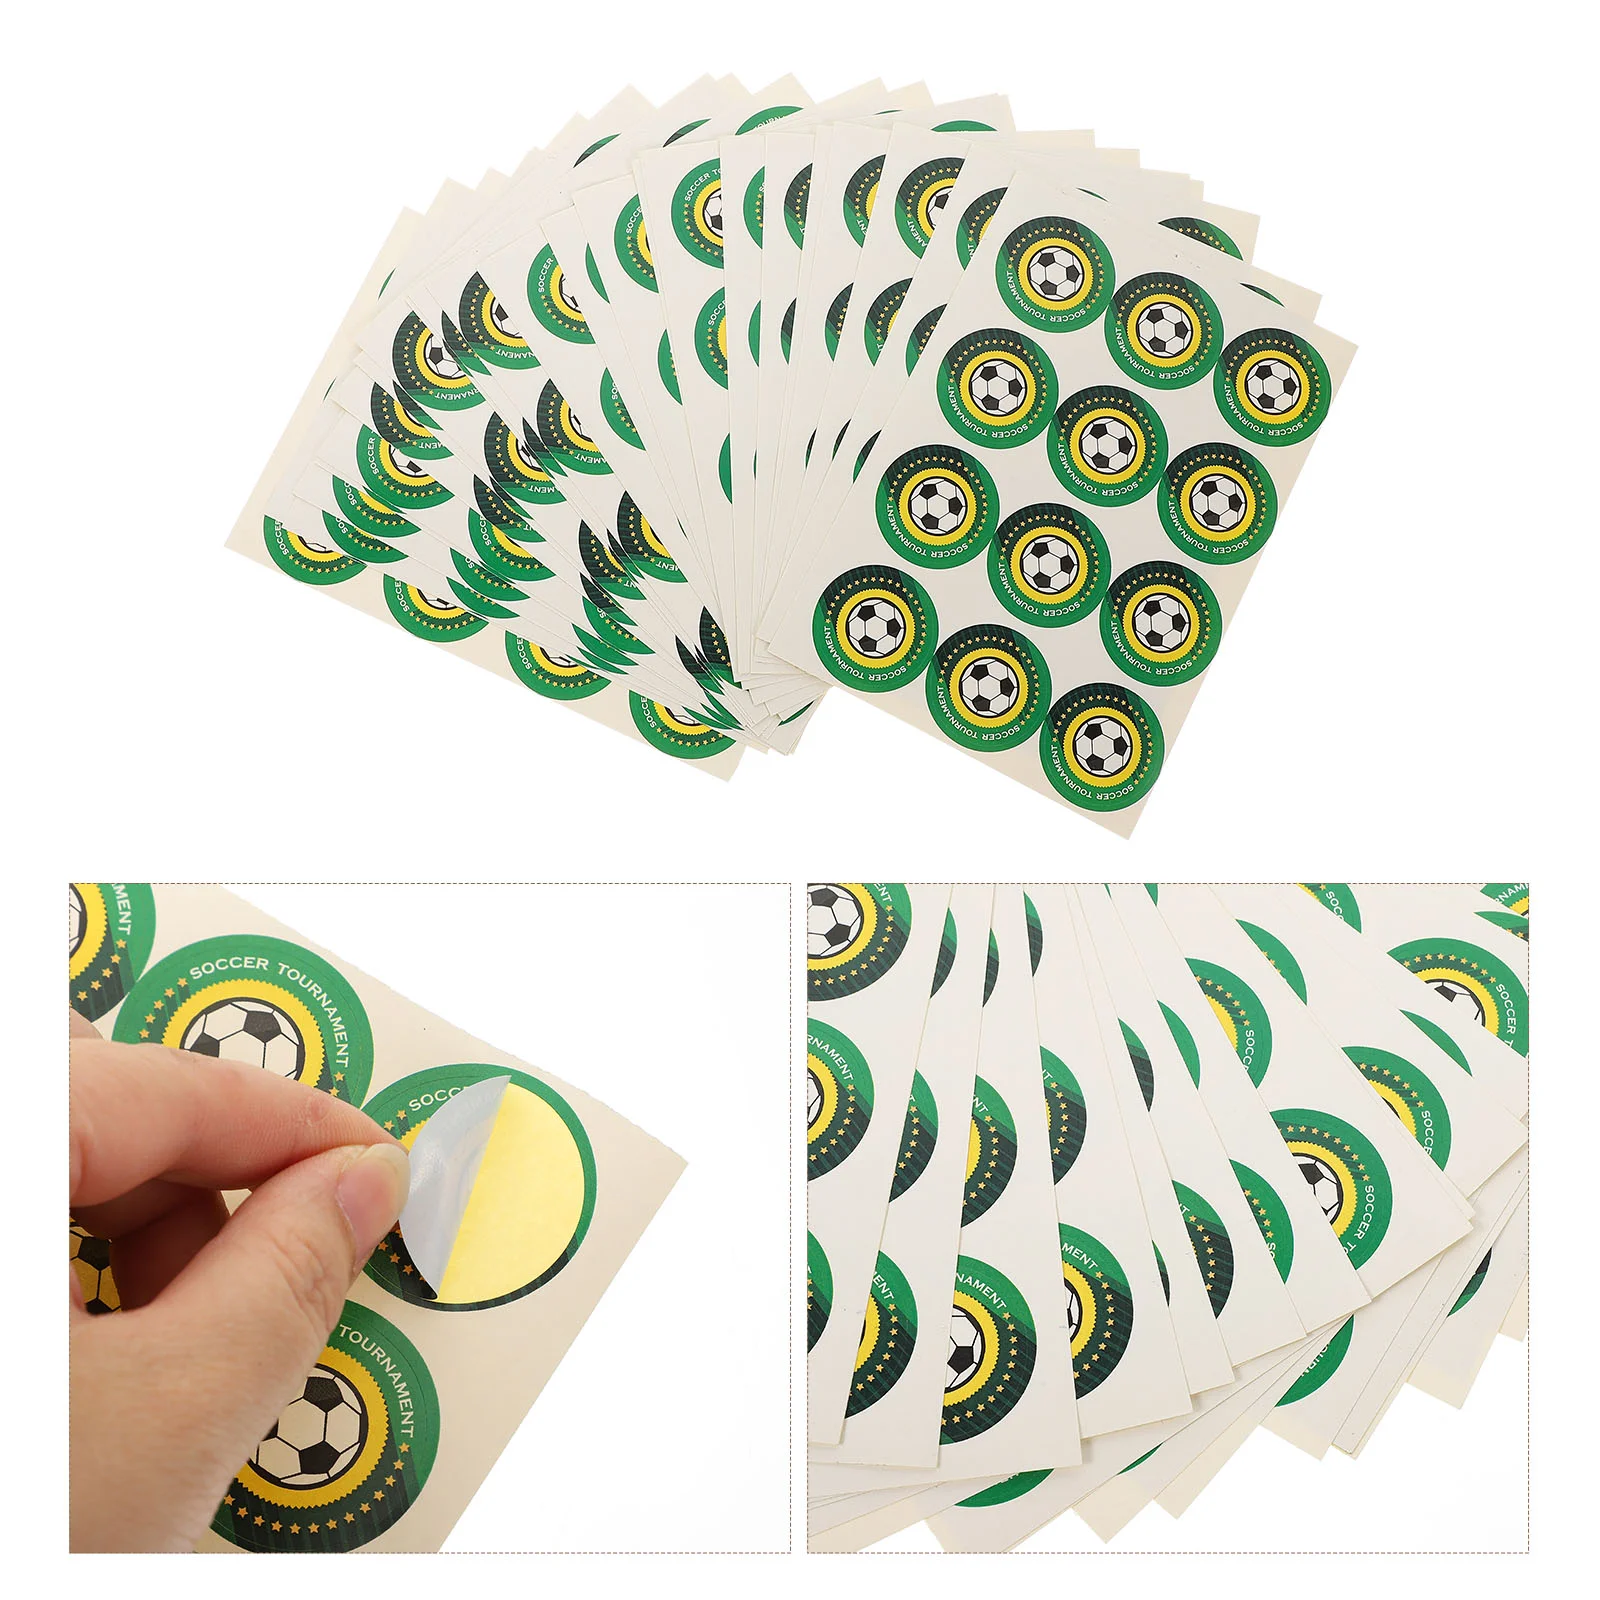 

24 Pcs Stickers Label Decals DIY Gift Wrapping Stickers Soccer Theme Sealing Stickers for Kids Men Crafters Women